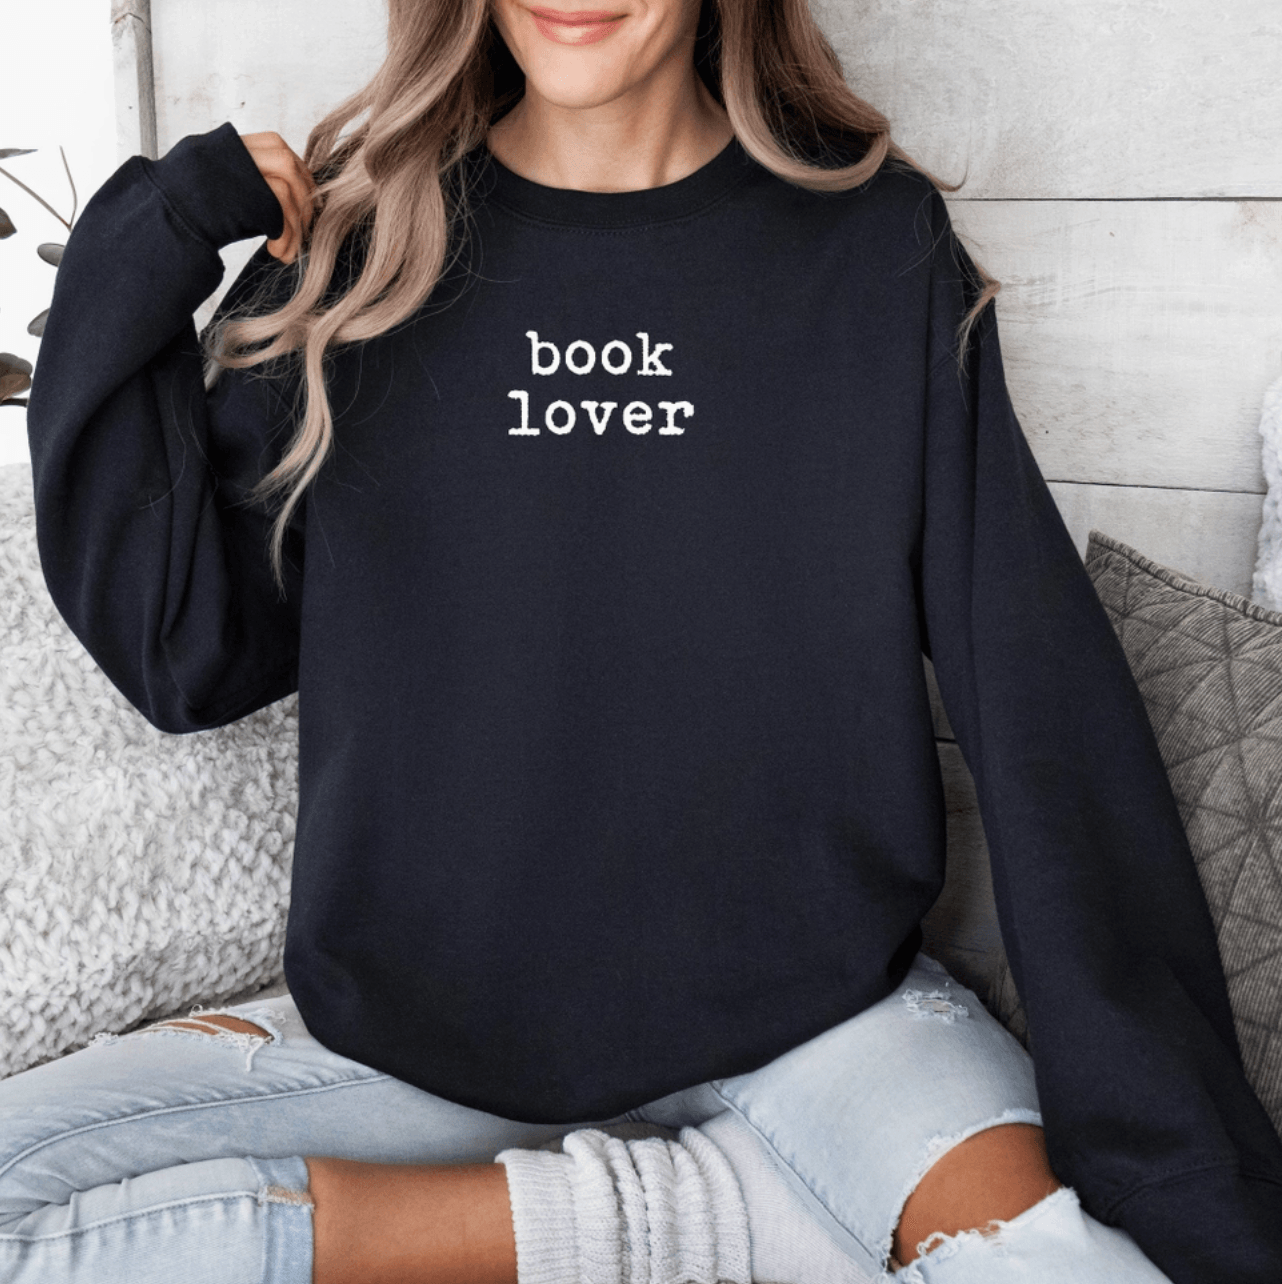 BOOK LOVER PULLOVER , graphic pulllover , It's NOMB , COZY GRAPHIC PULLOVER, COZY GRAPHIC SWEATSHIRT, graphic sweatshirt, SWEATSHIRTS, SWEATSHIRTS FOR BOOK LOVERS , It's NOMB , itsnomb.com